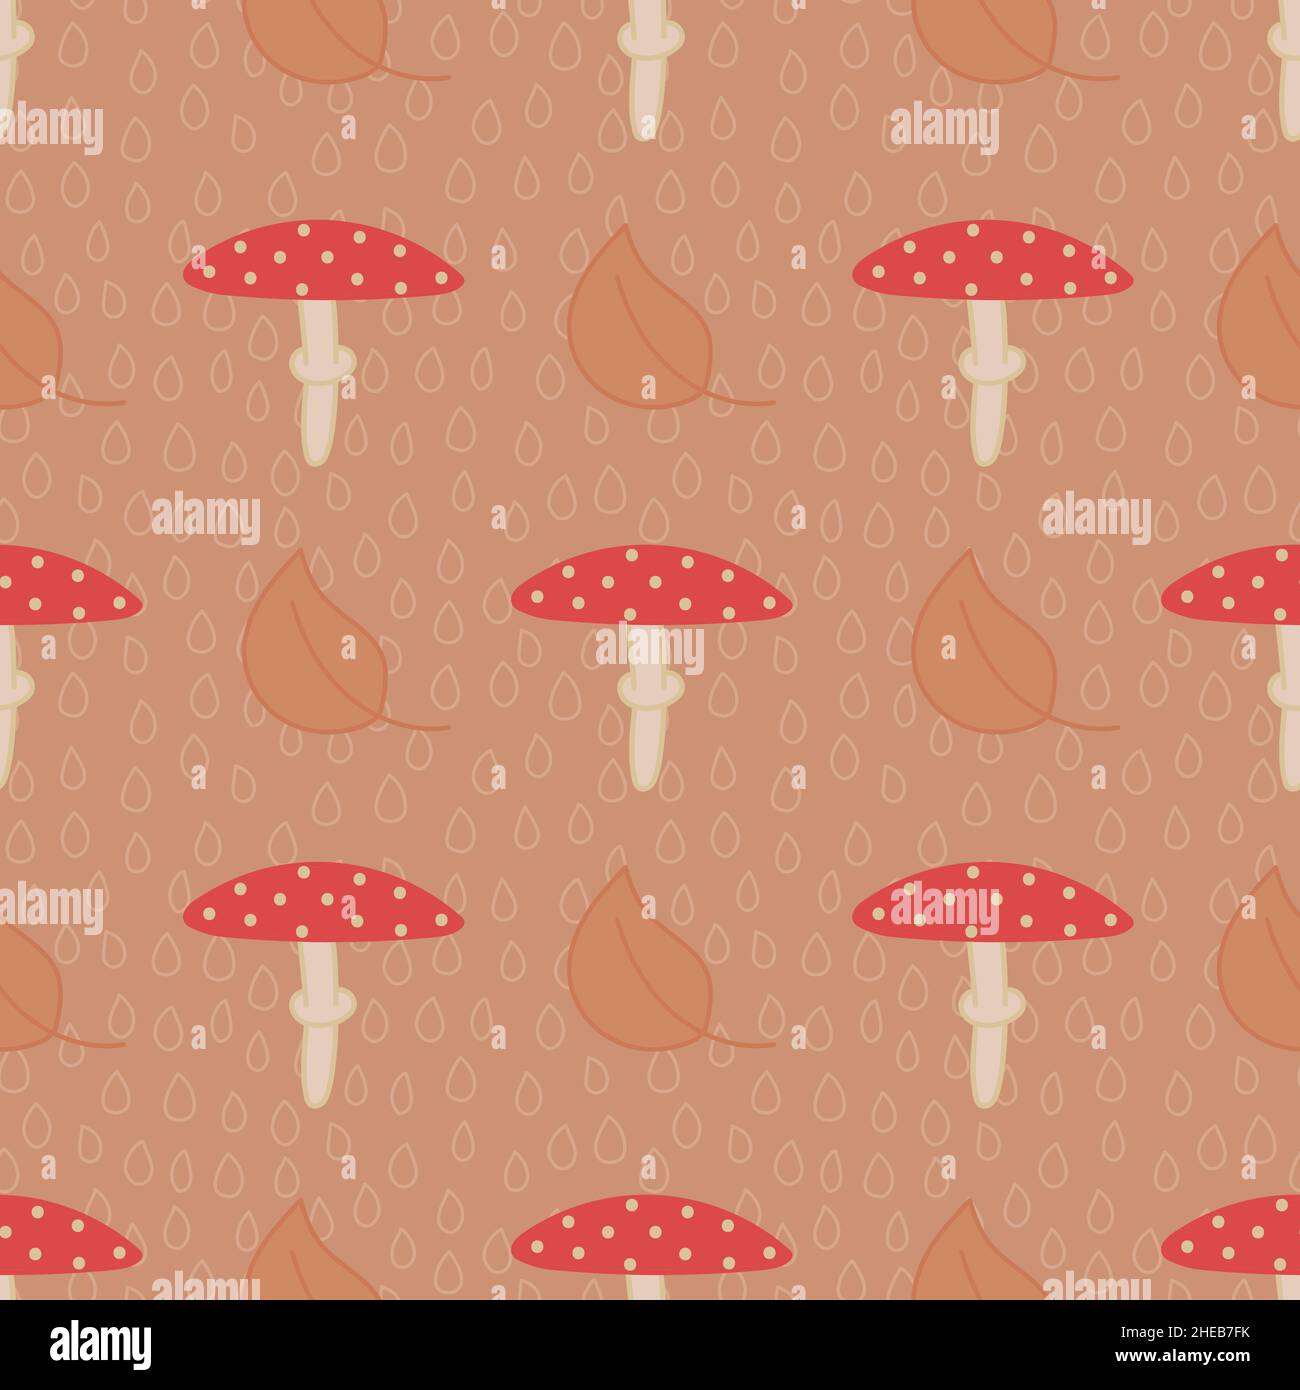 Amanita mushroom seamless pattern with leaves and rain drops on beige background. Stock Vector